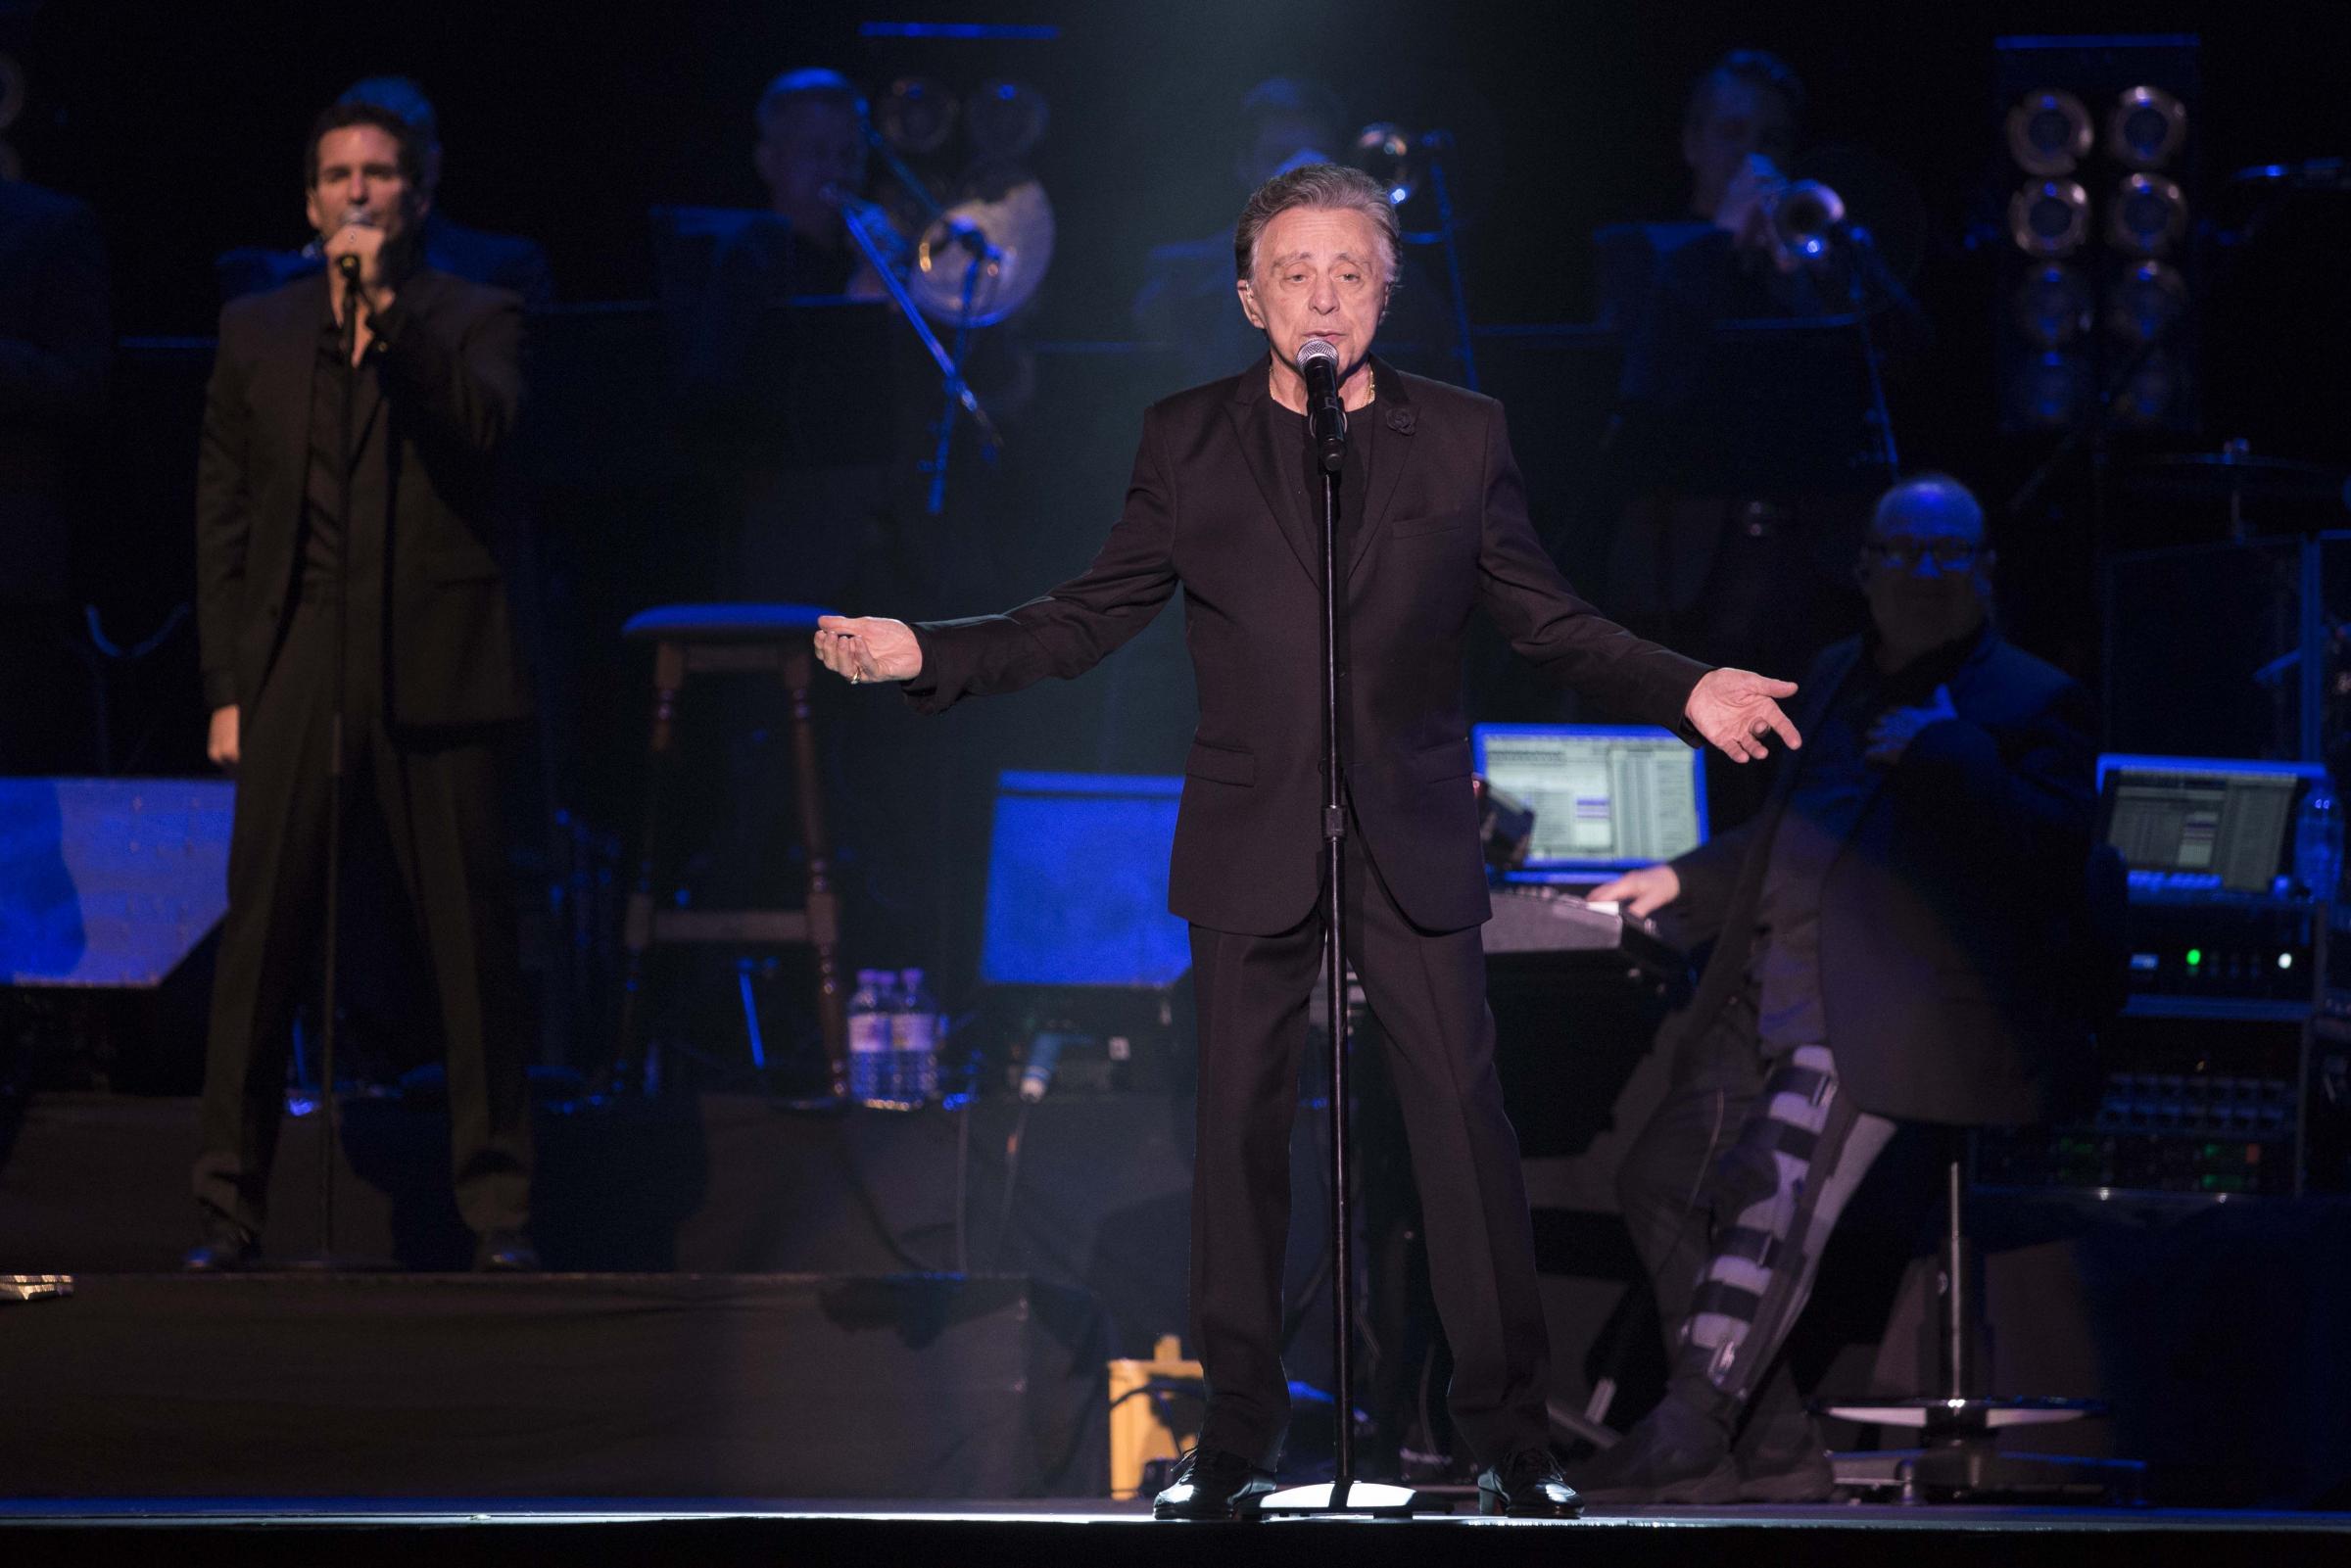 REVIEW: Rapturous applause for Frankie Valli after a wholly energetic show